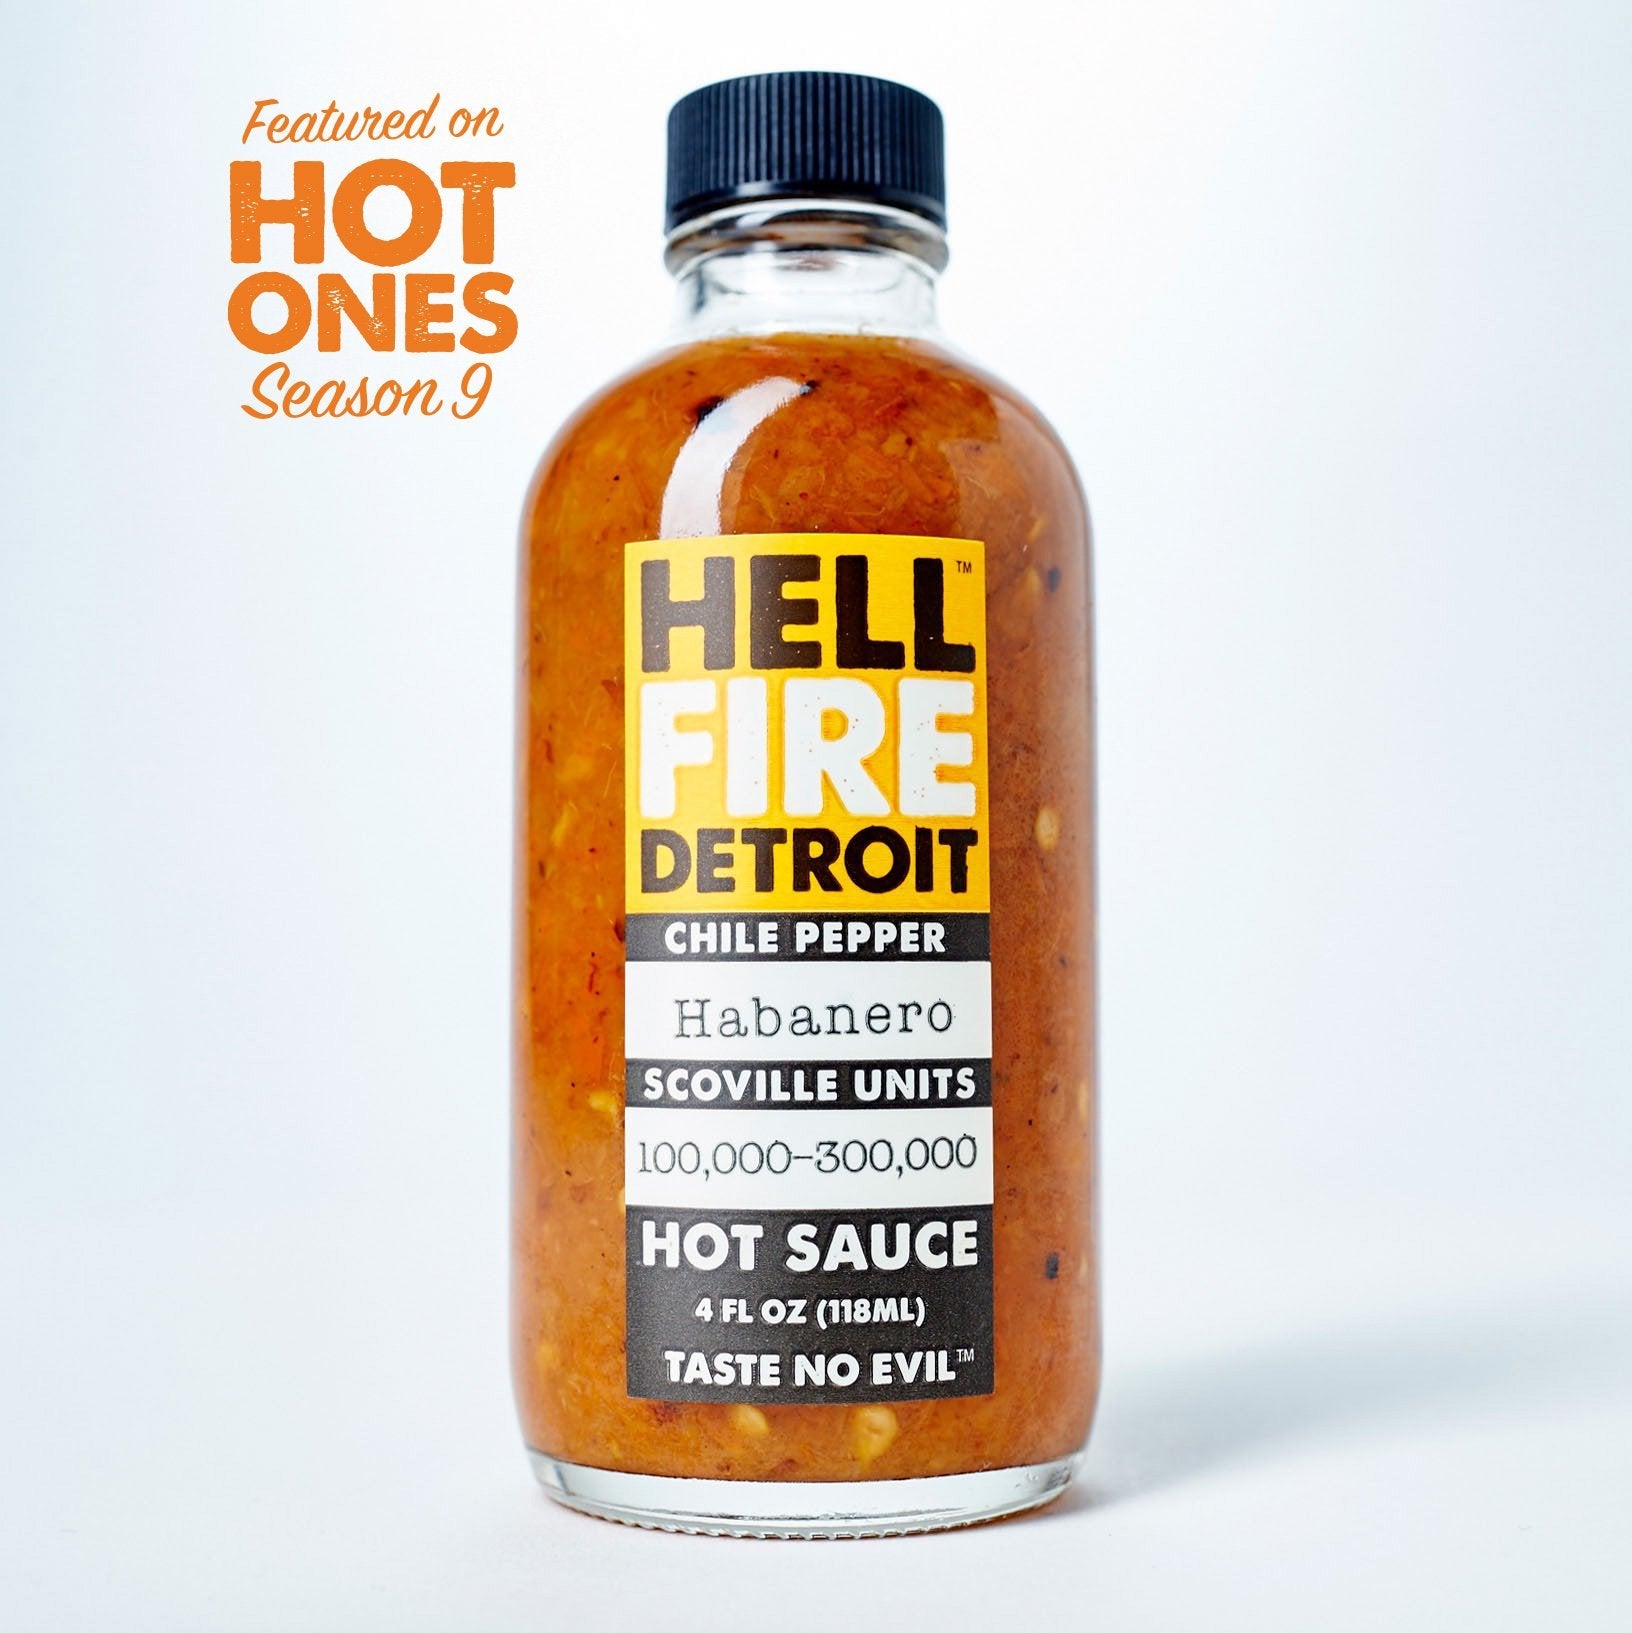 4 fluid ounce glass bottle with a black twist off cap filled with hot sauce. Has yellow, black, and white label with text, "Hell Fire Detroit, Chile Peppers, Habanero, Scoville Units 100,000 - 300,000 Hot Sauce. "